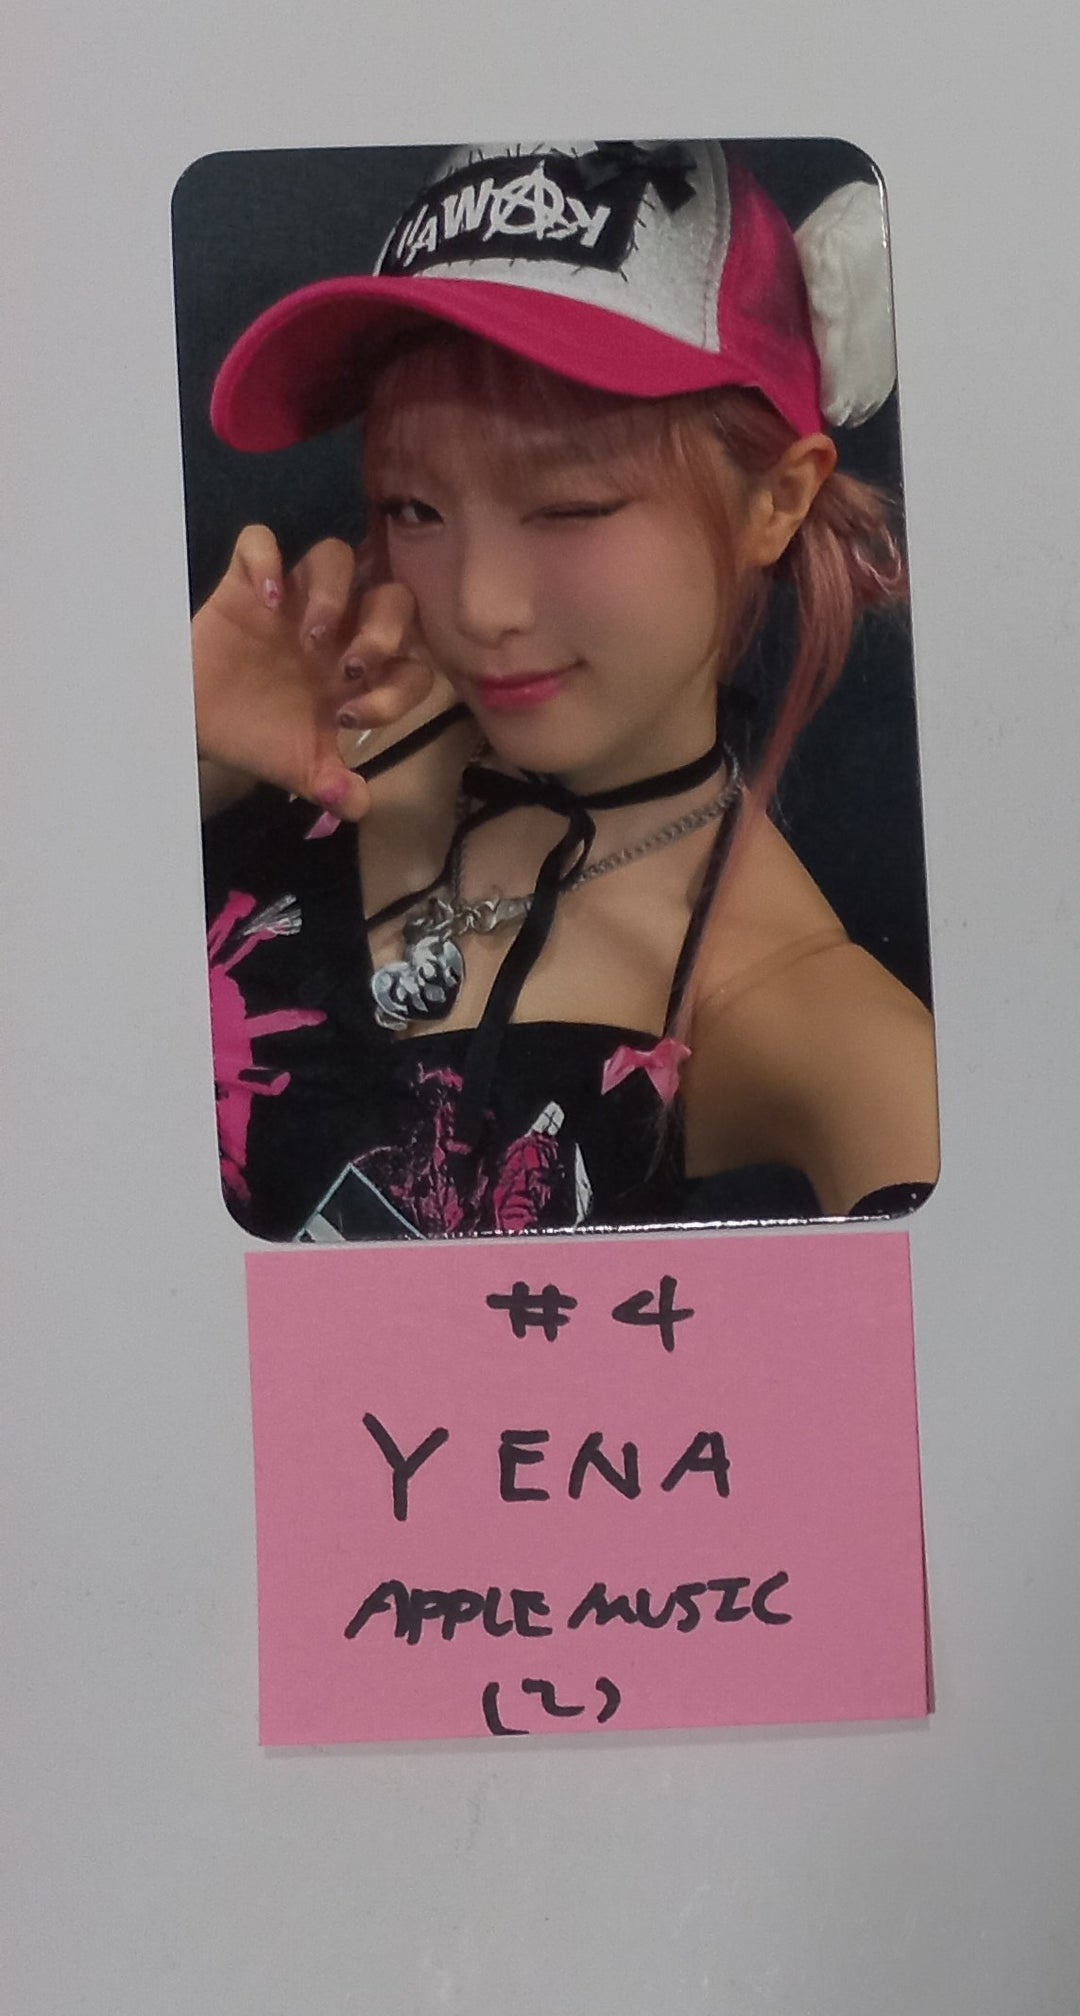 YENA "Good Morning" - Apple Music Fansign Event Photocard Round 2 [24.2.14]